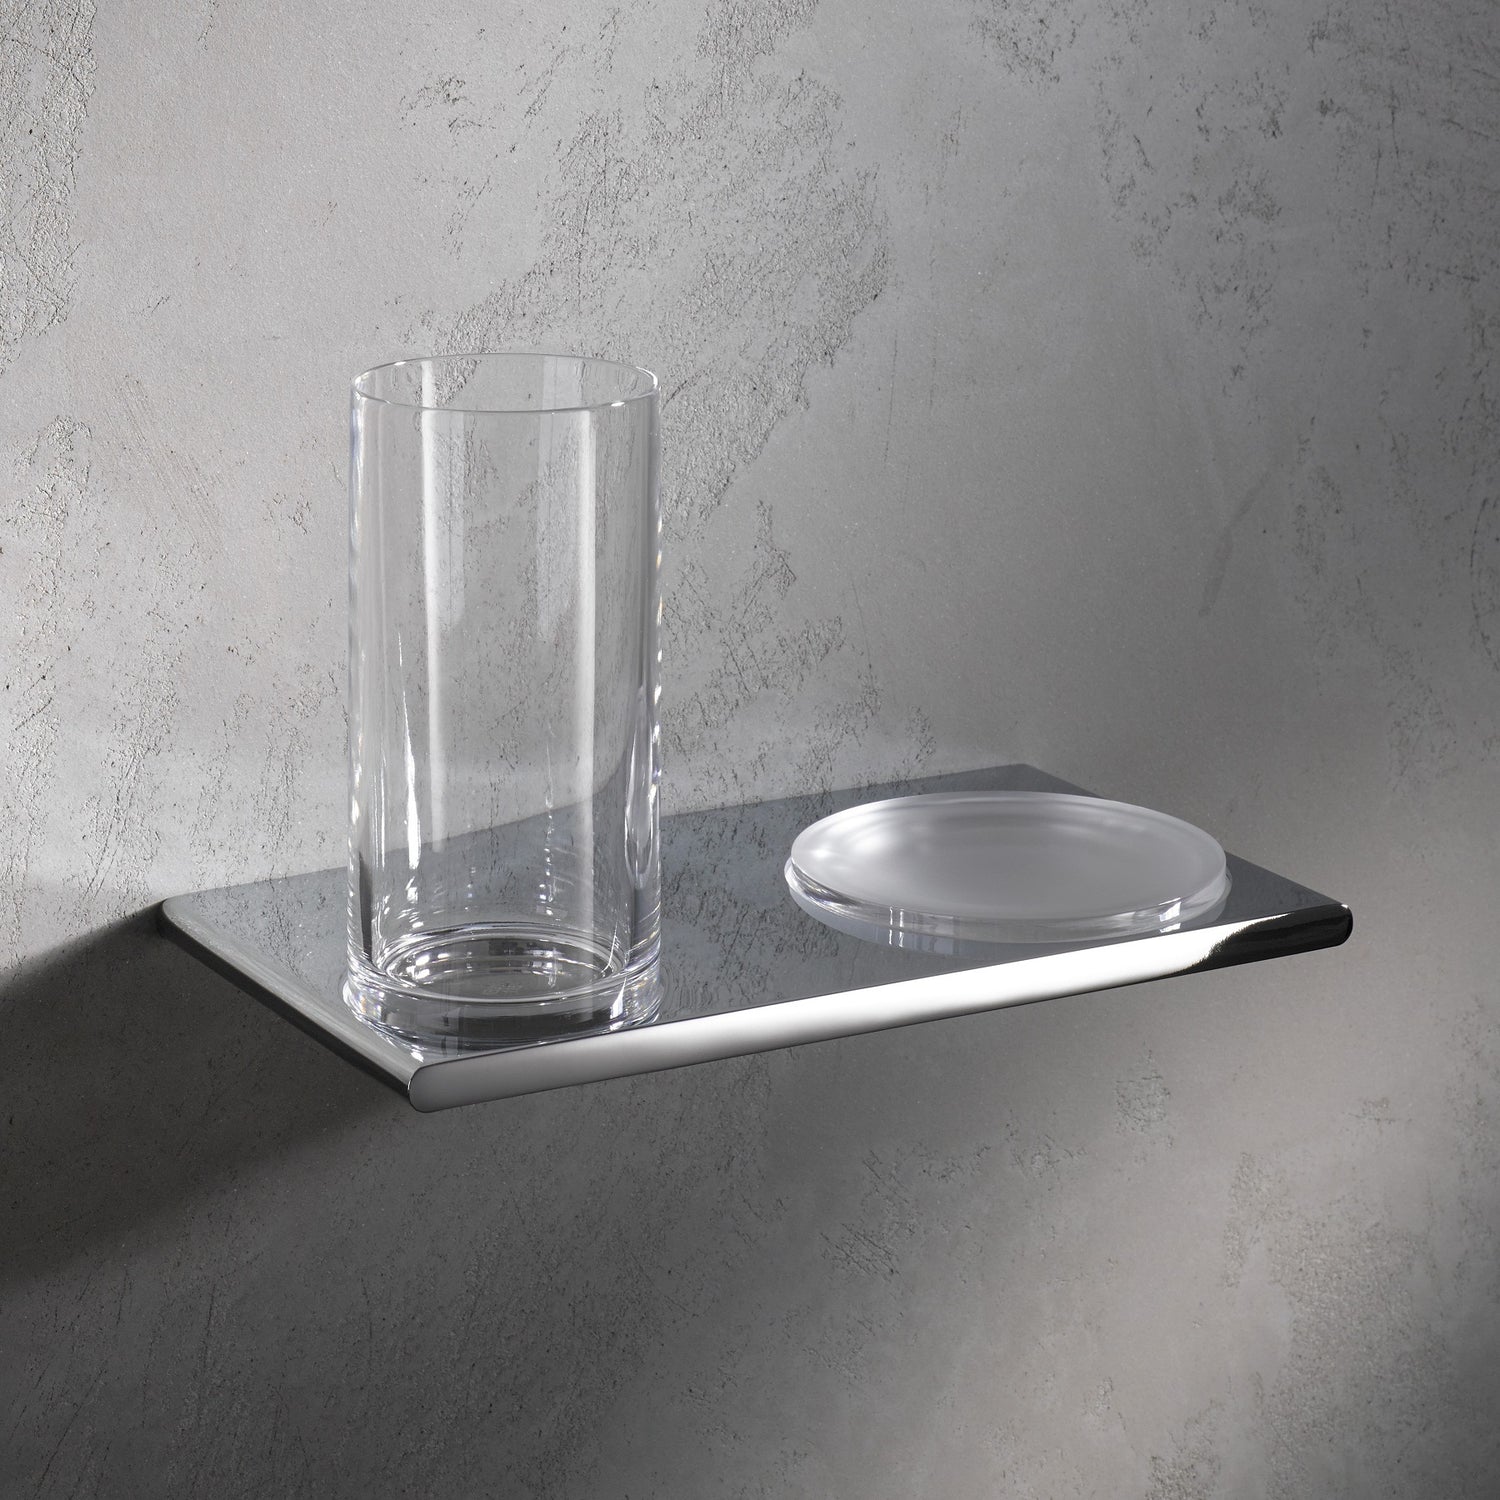 Keuco Edition 400 Tumbler &amp; Soap Holder with Tumbler and Soap Dish